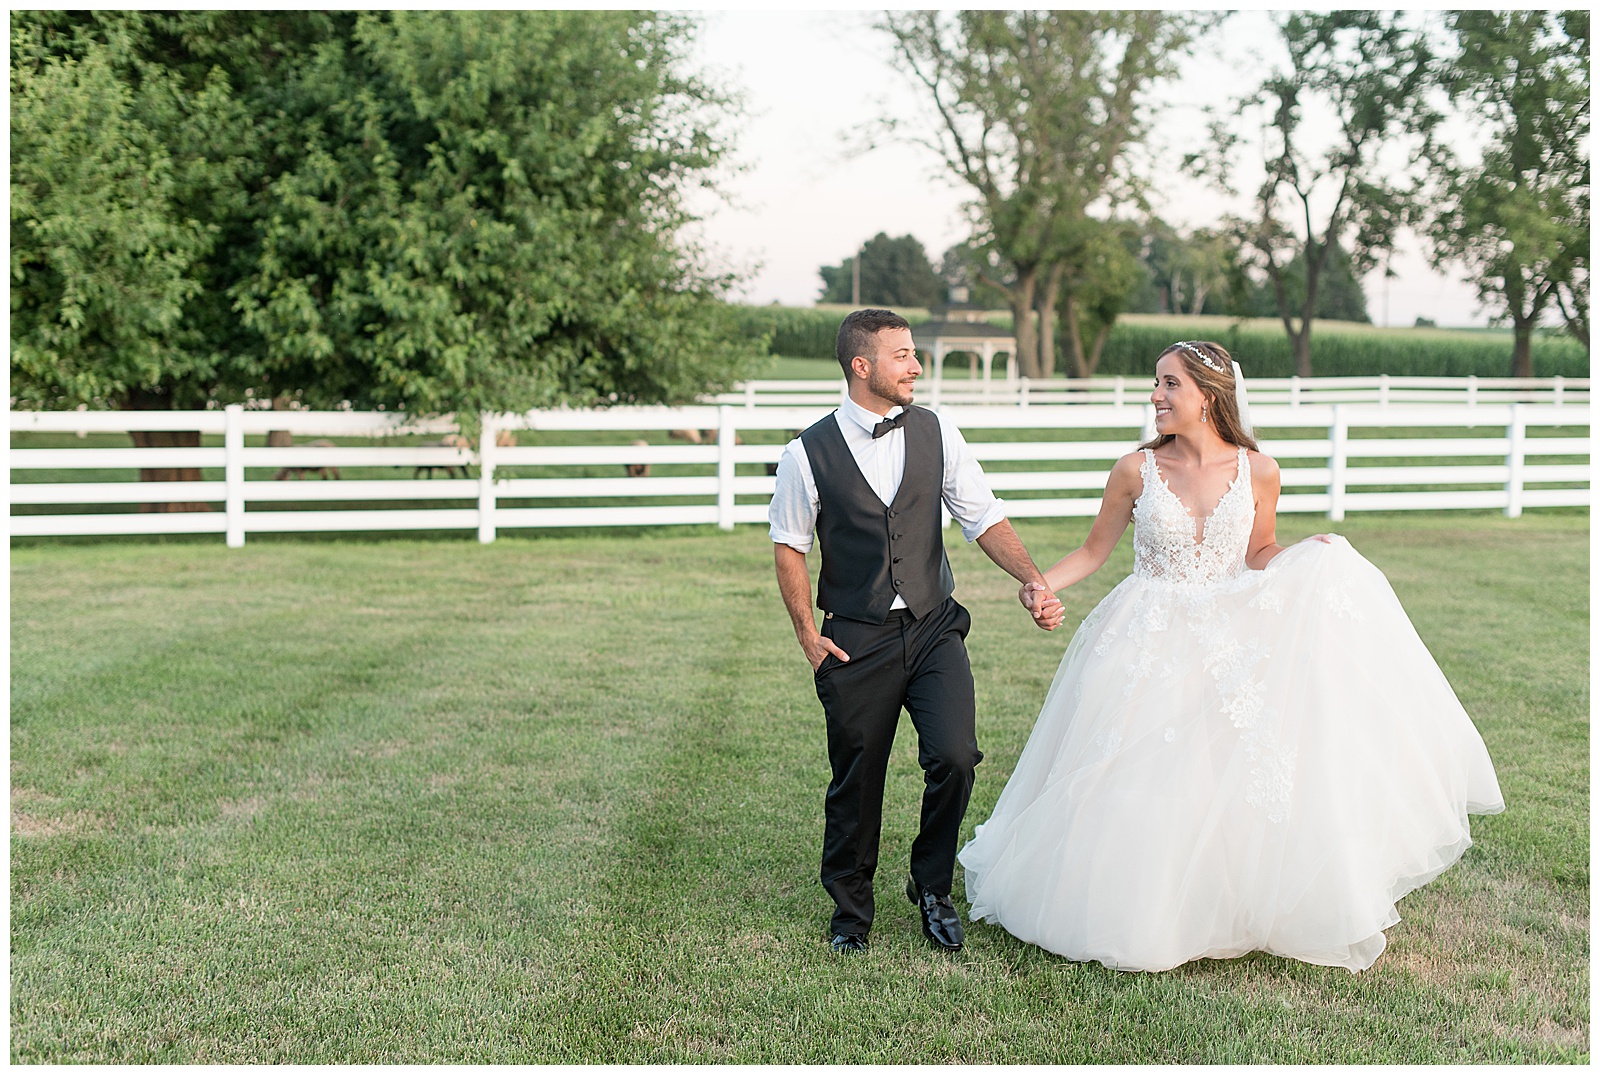 bride holding grooms hand leading him as they smile and look at one another in grass with white fence and trees behind them